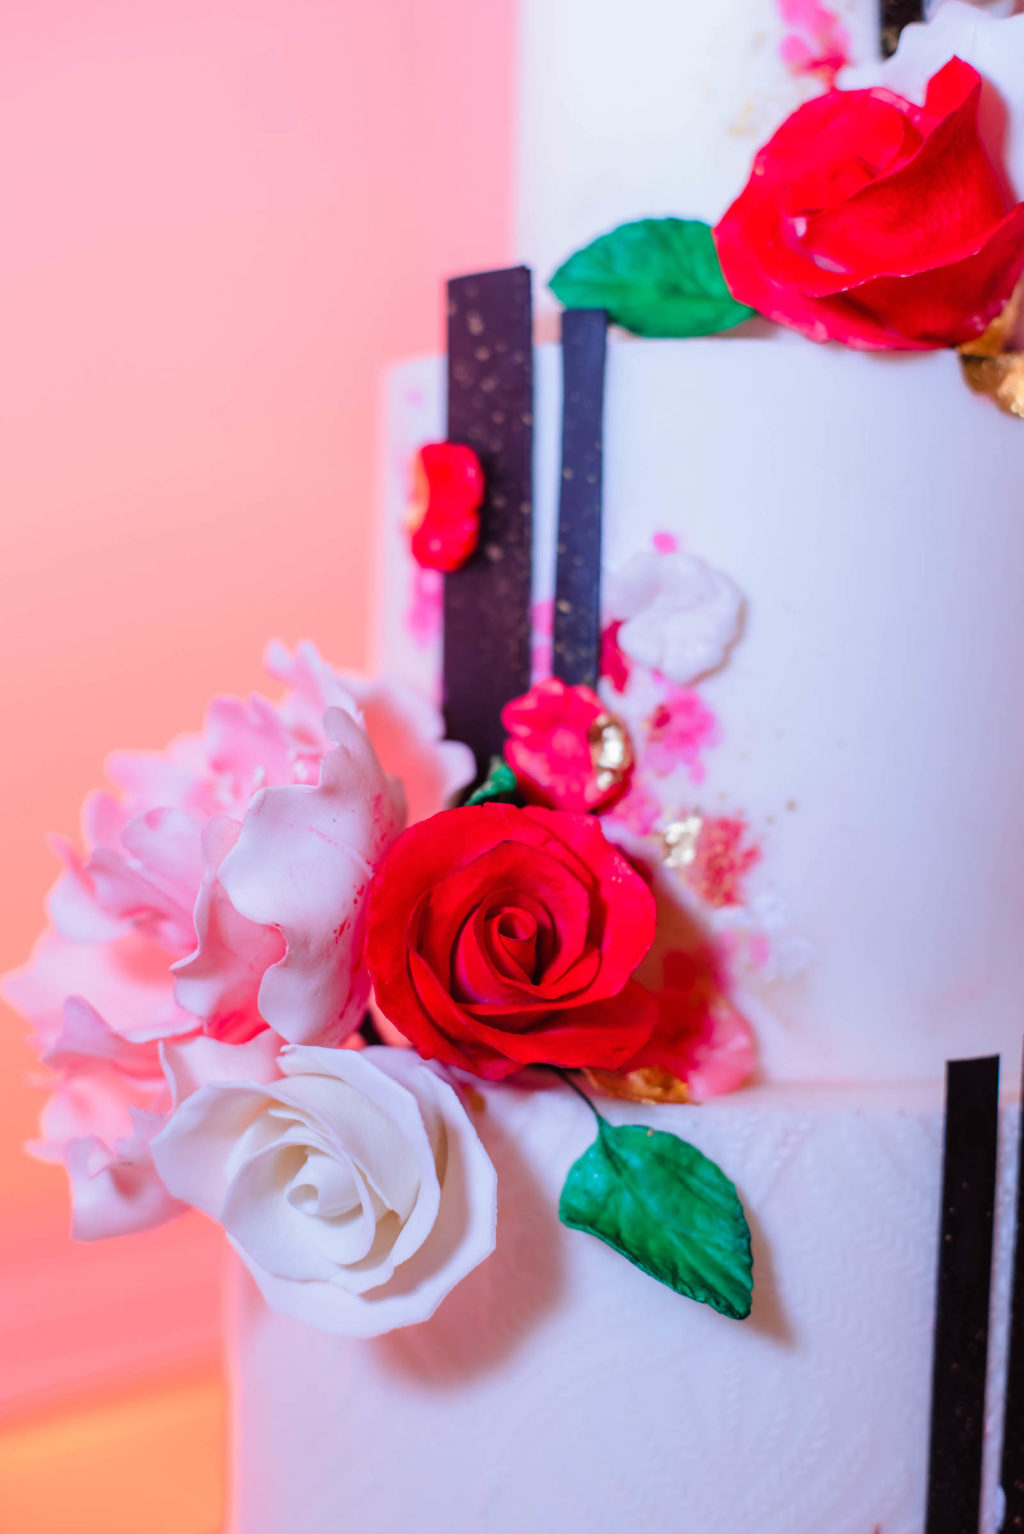 Valentine Inspired Wedding Cake with Red, White and Pink Sugar Flowers | Tampa Bay Cake Company